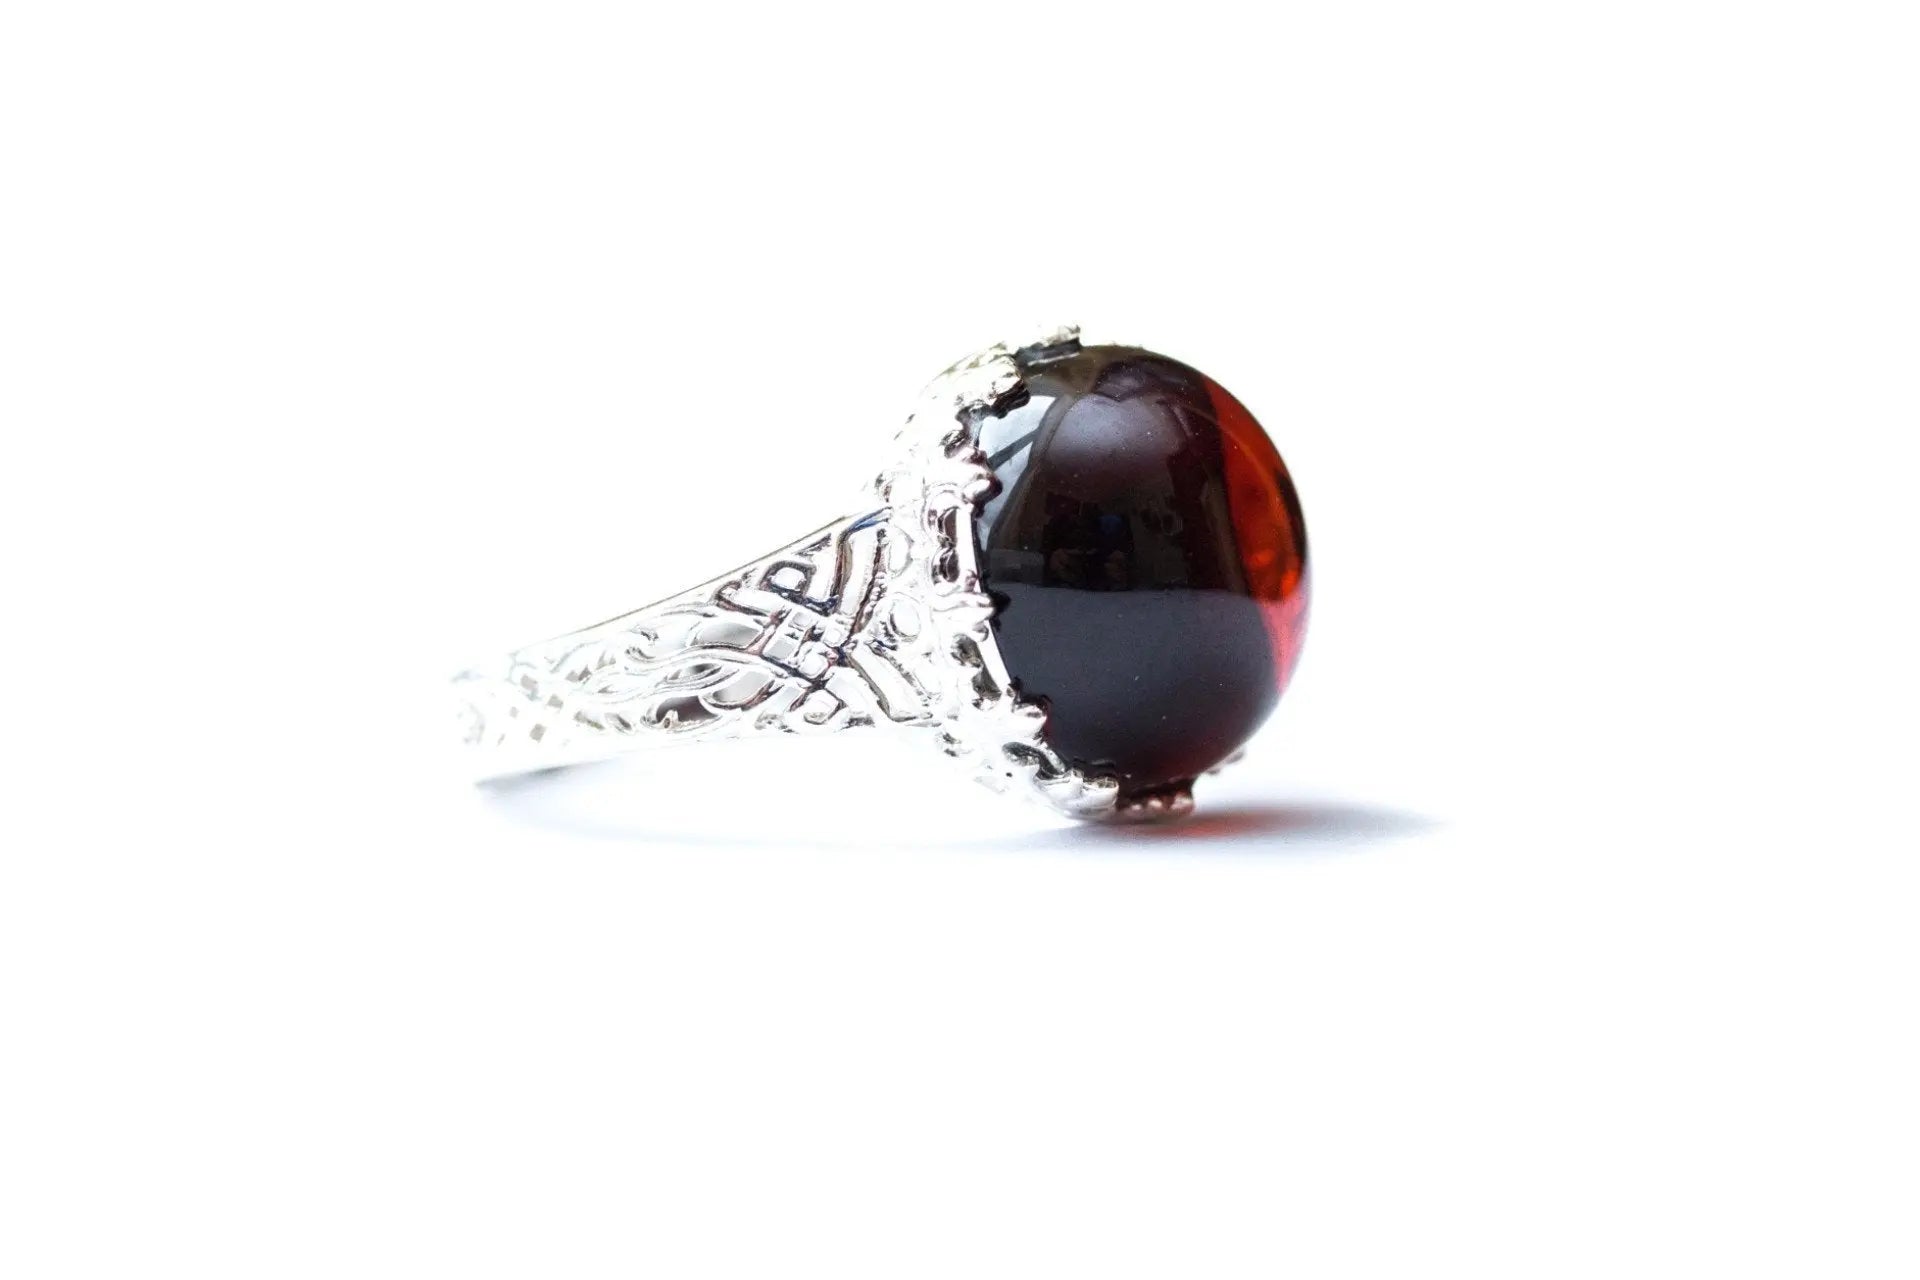 Baltic Beauty Rings Dainty Cherry Amber Ring